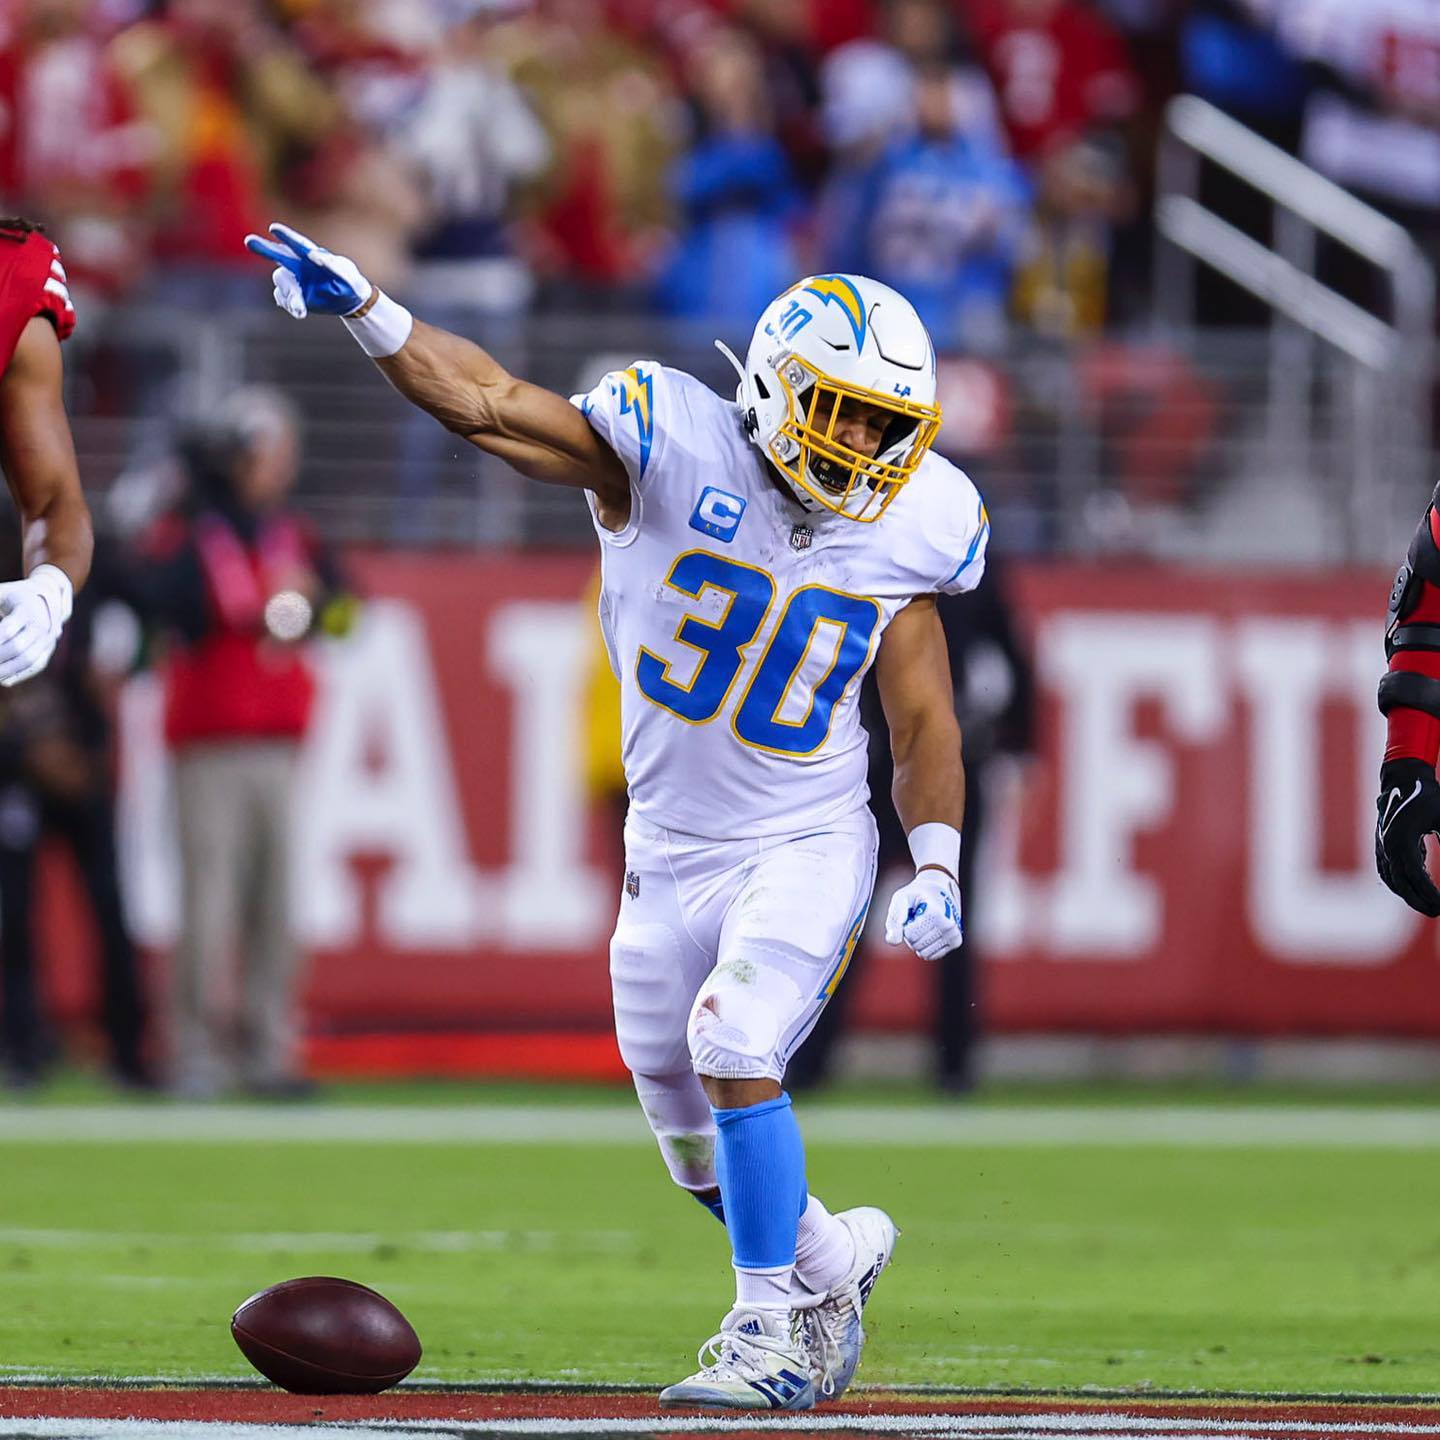 Austin Ekeler scores another touchdown for the Los Angeles Chargers against Indianapolis Colts: Watch